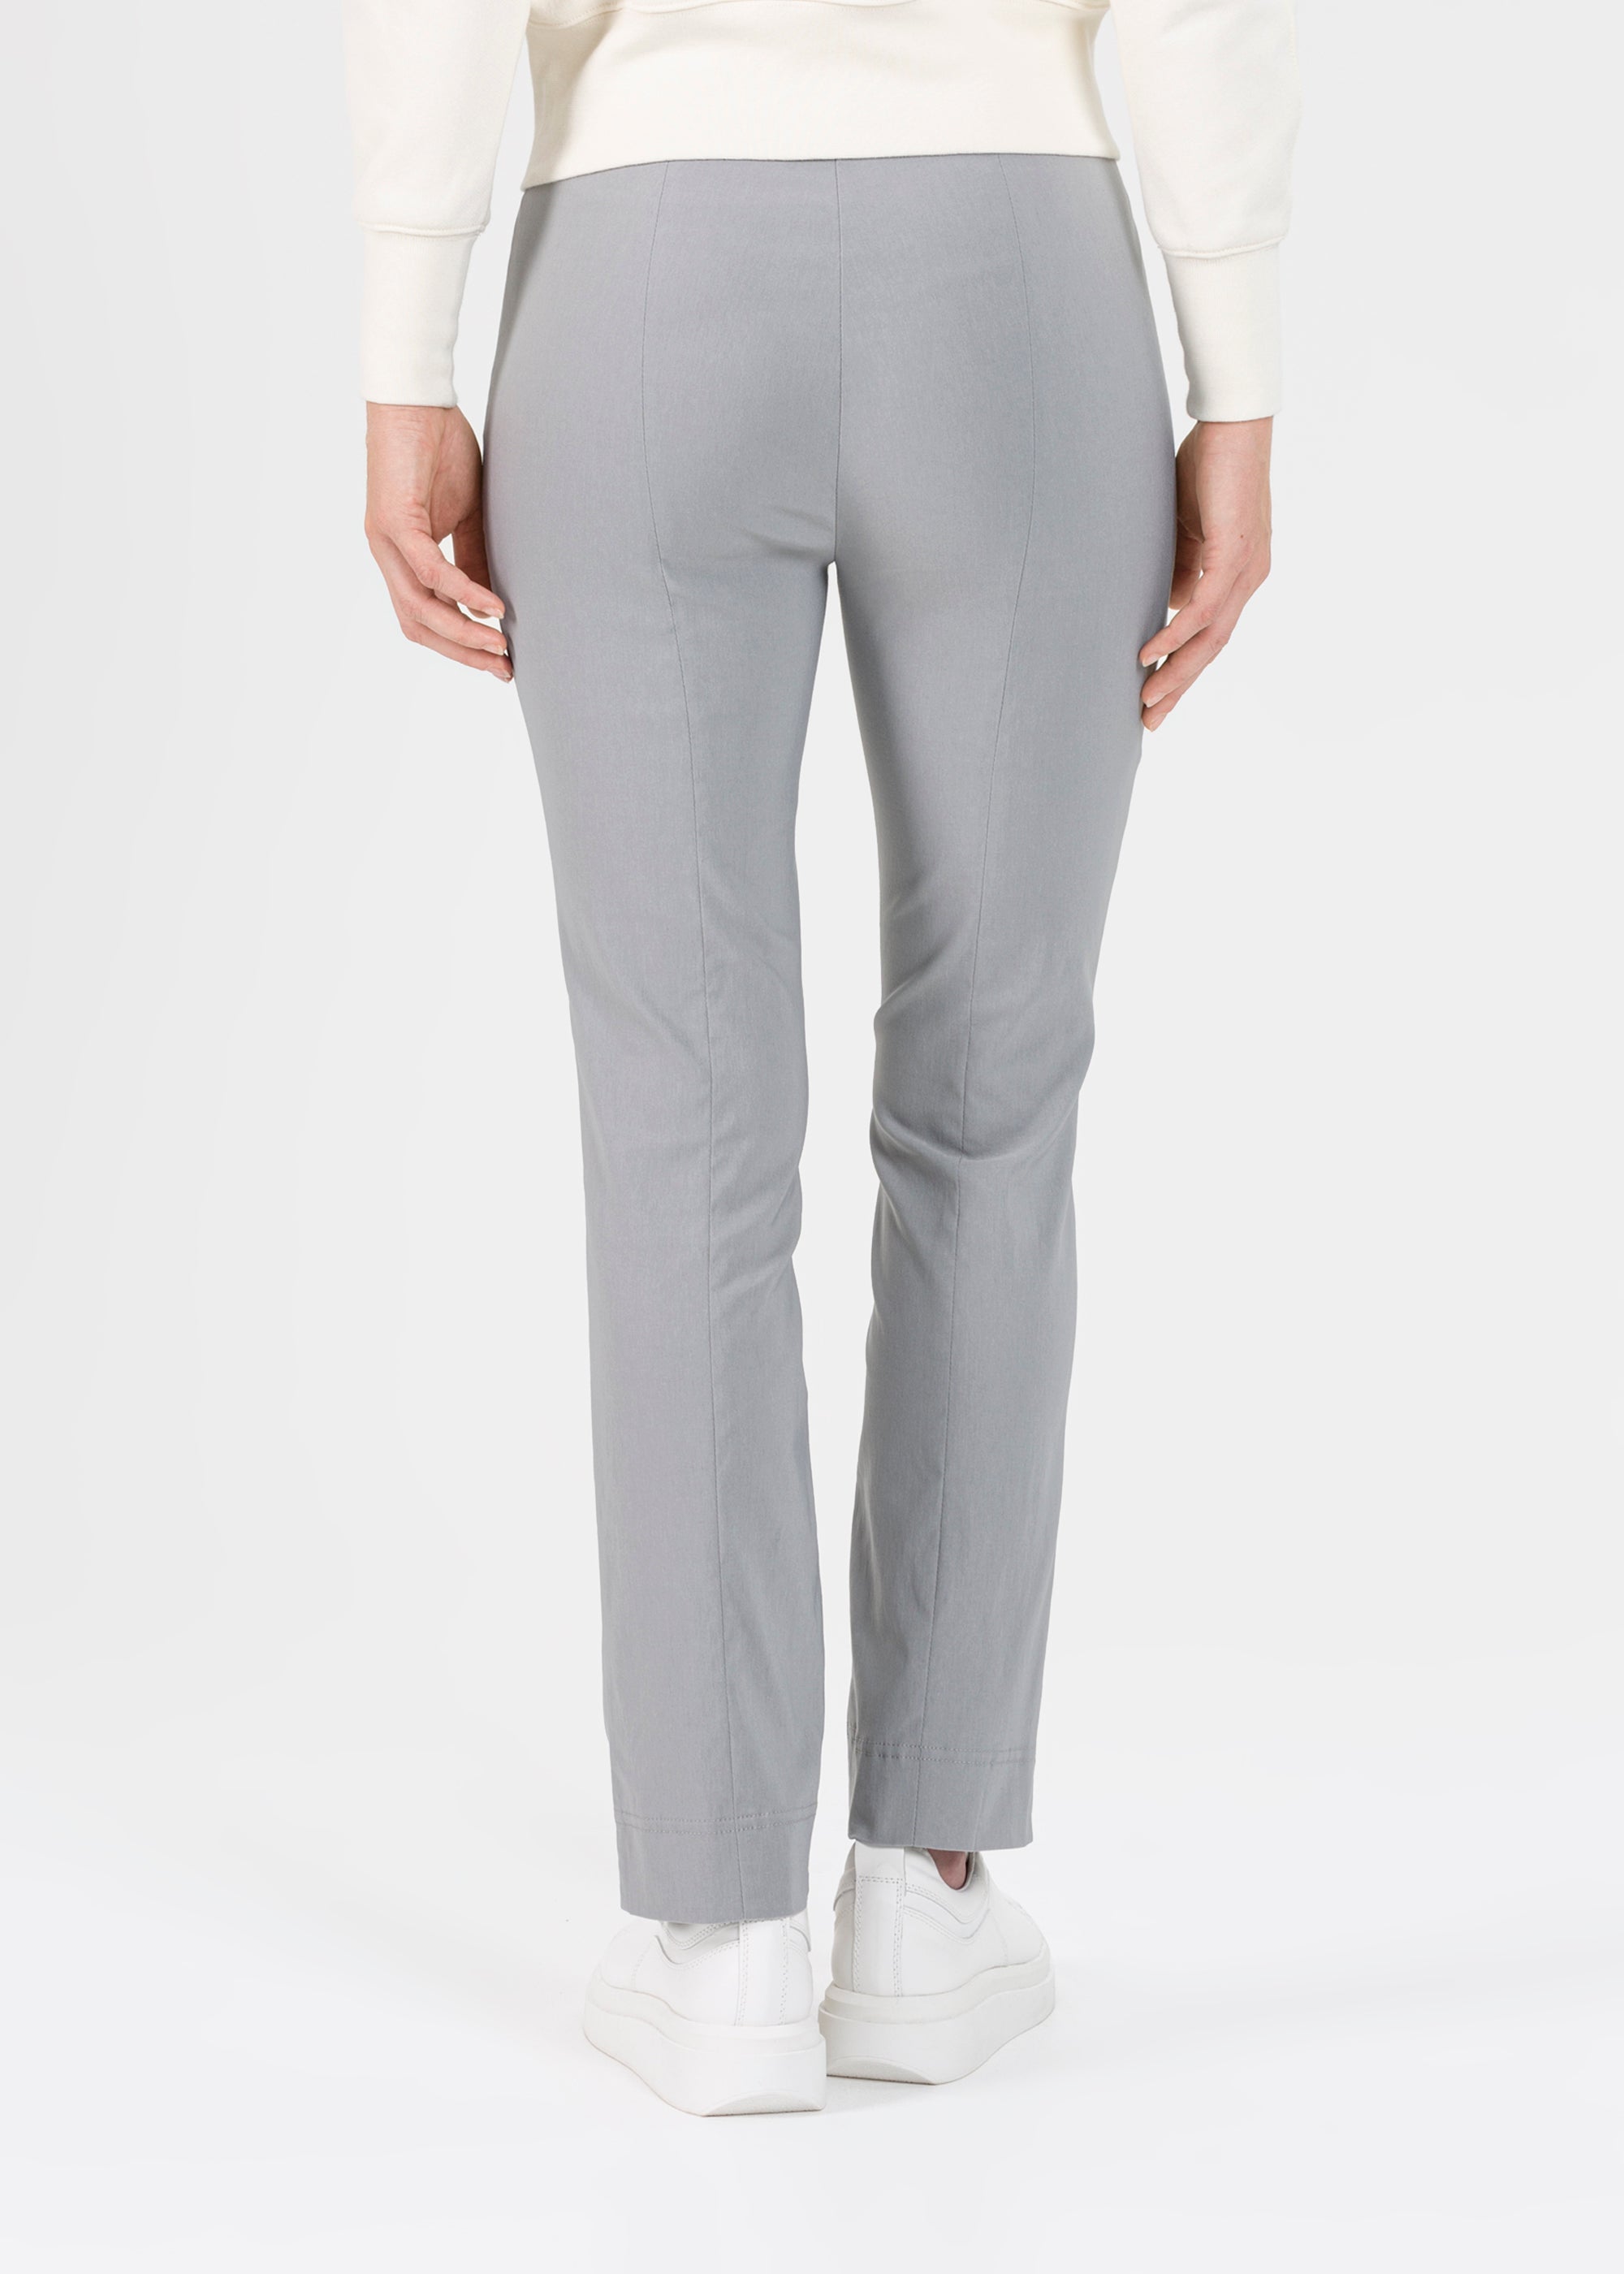 Ina ankle length stretch trousers in silver